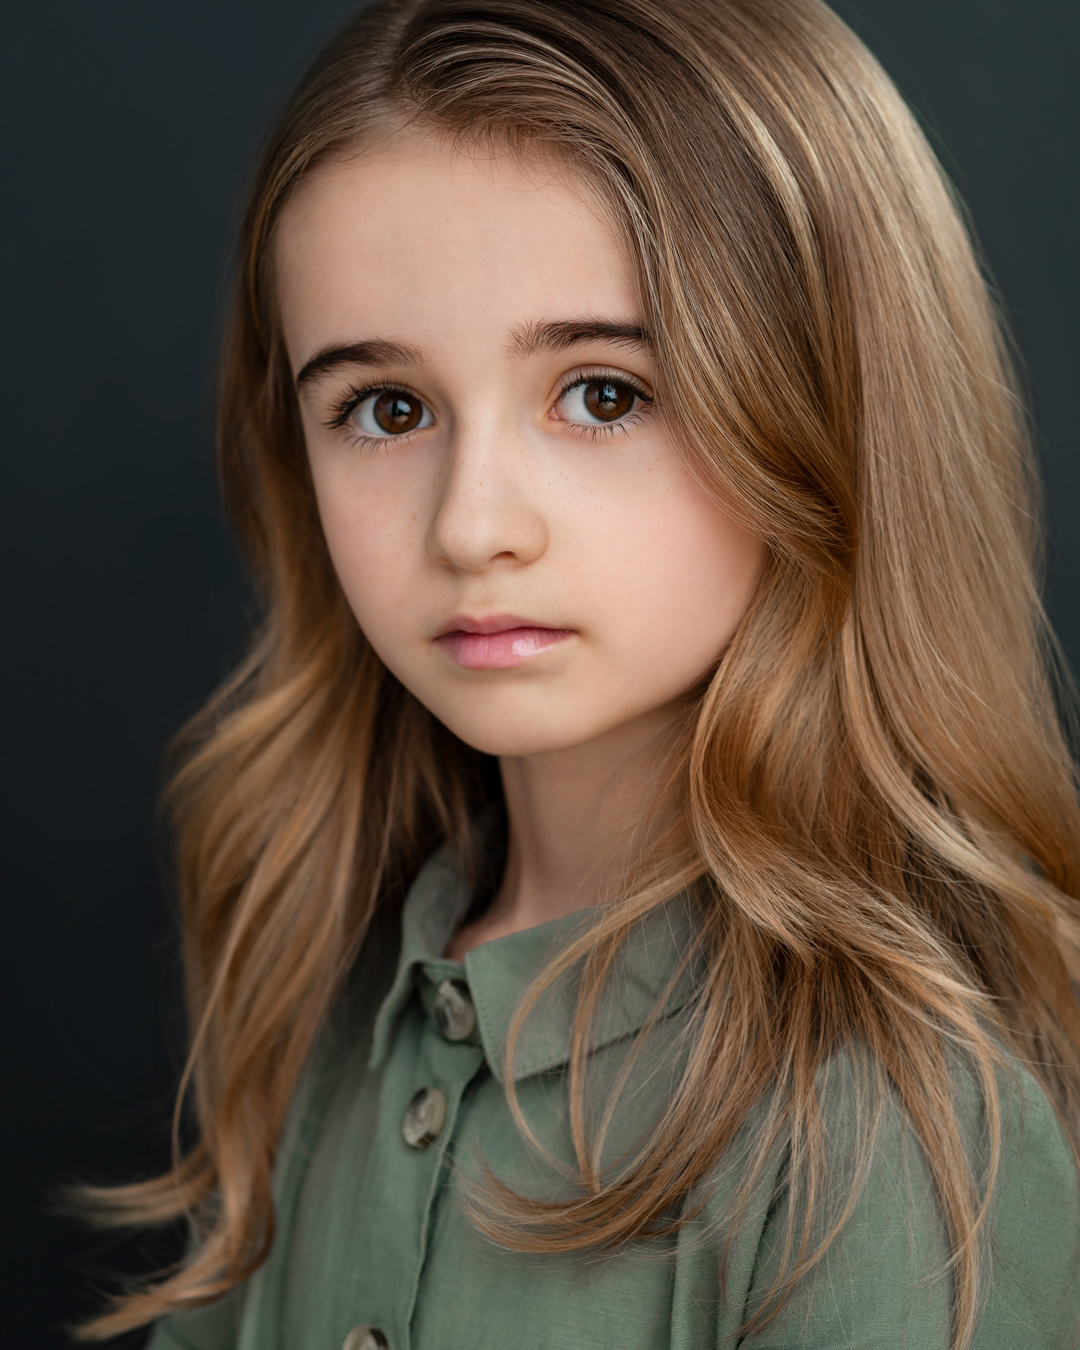 Child actress Milania Kerr from LeBlanc School of Acting